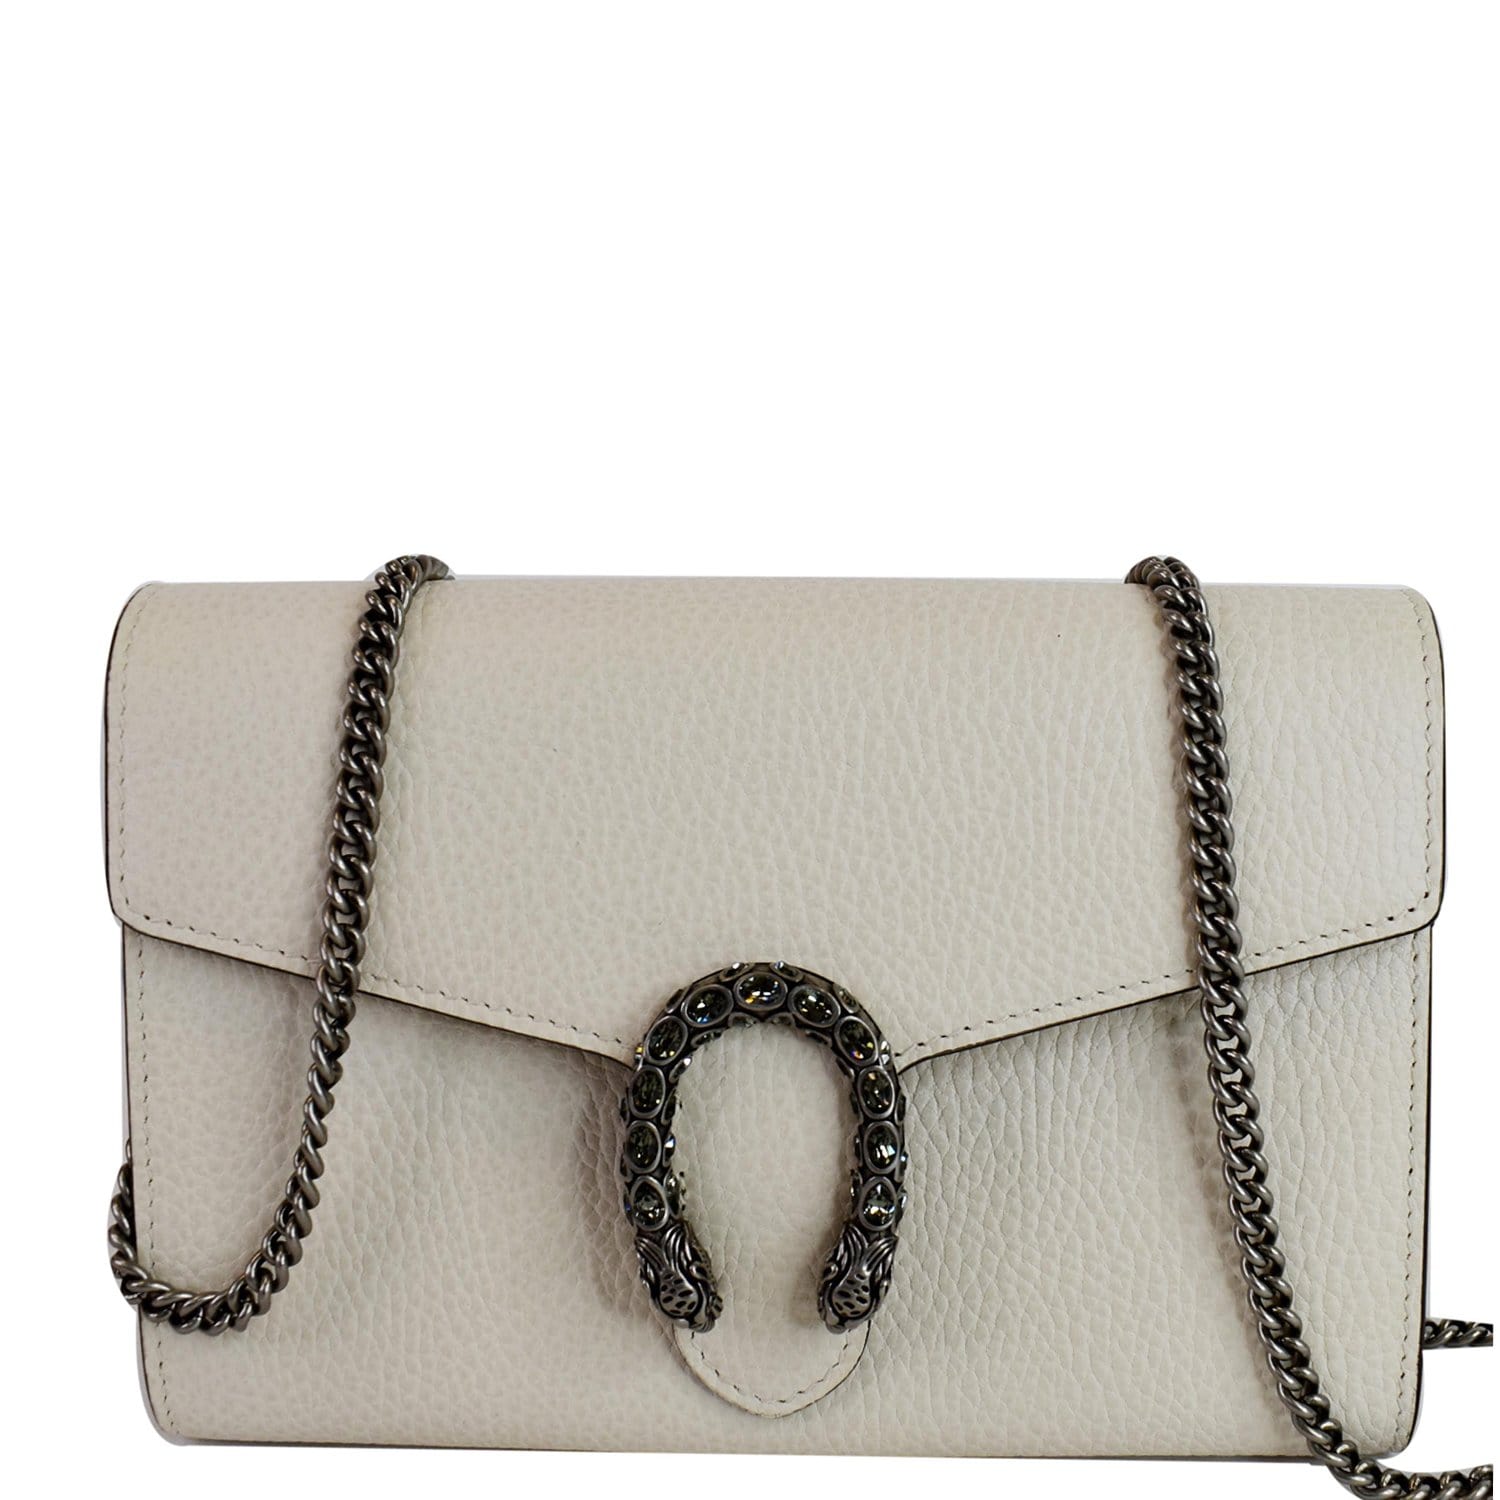 Gucci Dionysus Shoulder Bag Super Mini White in Leather with